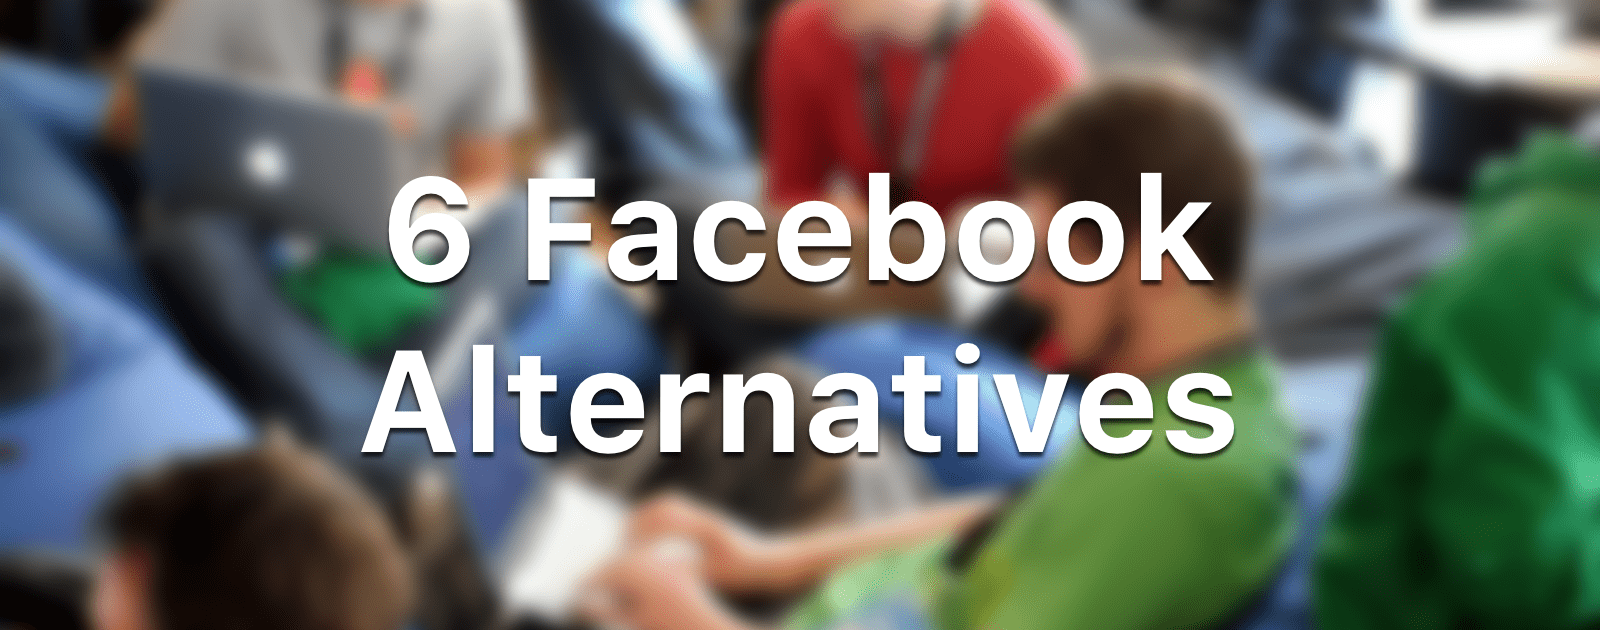 6 Facebook Alternatives to Stay Social on the Internet